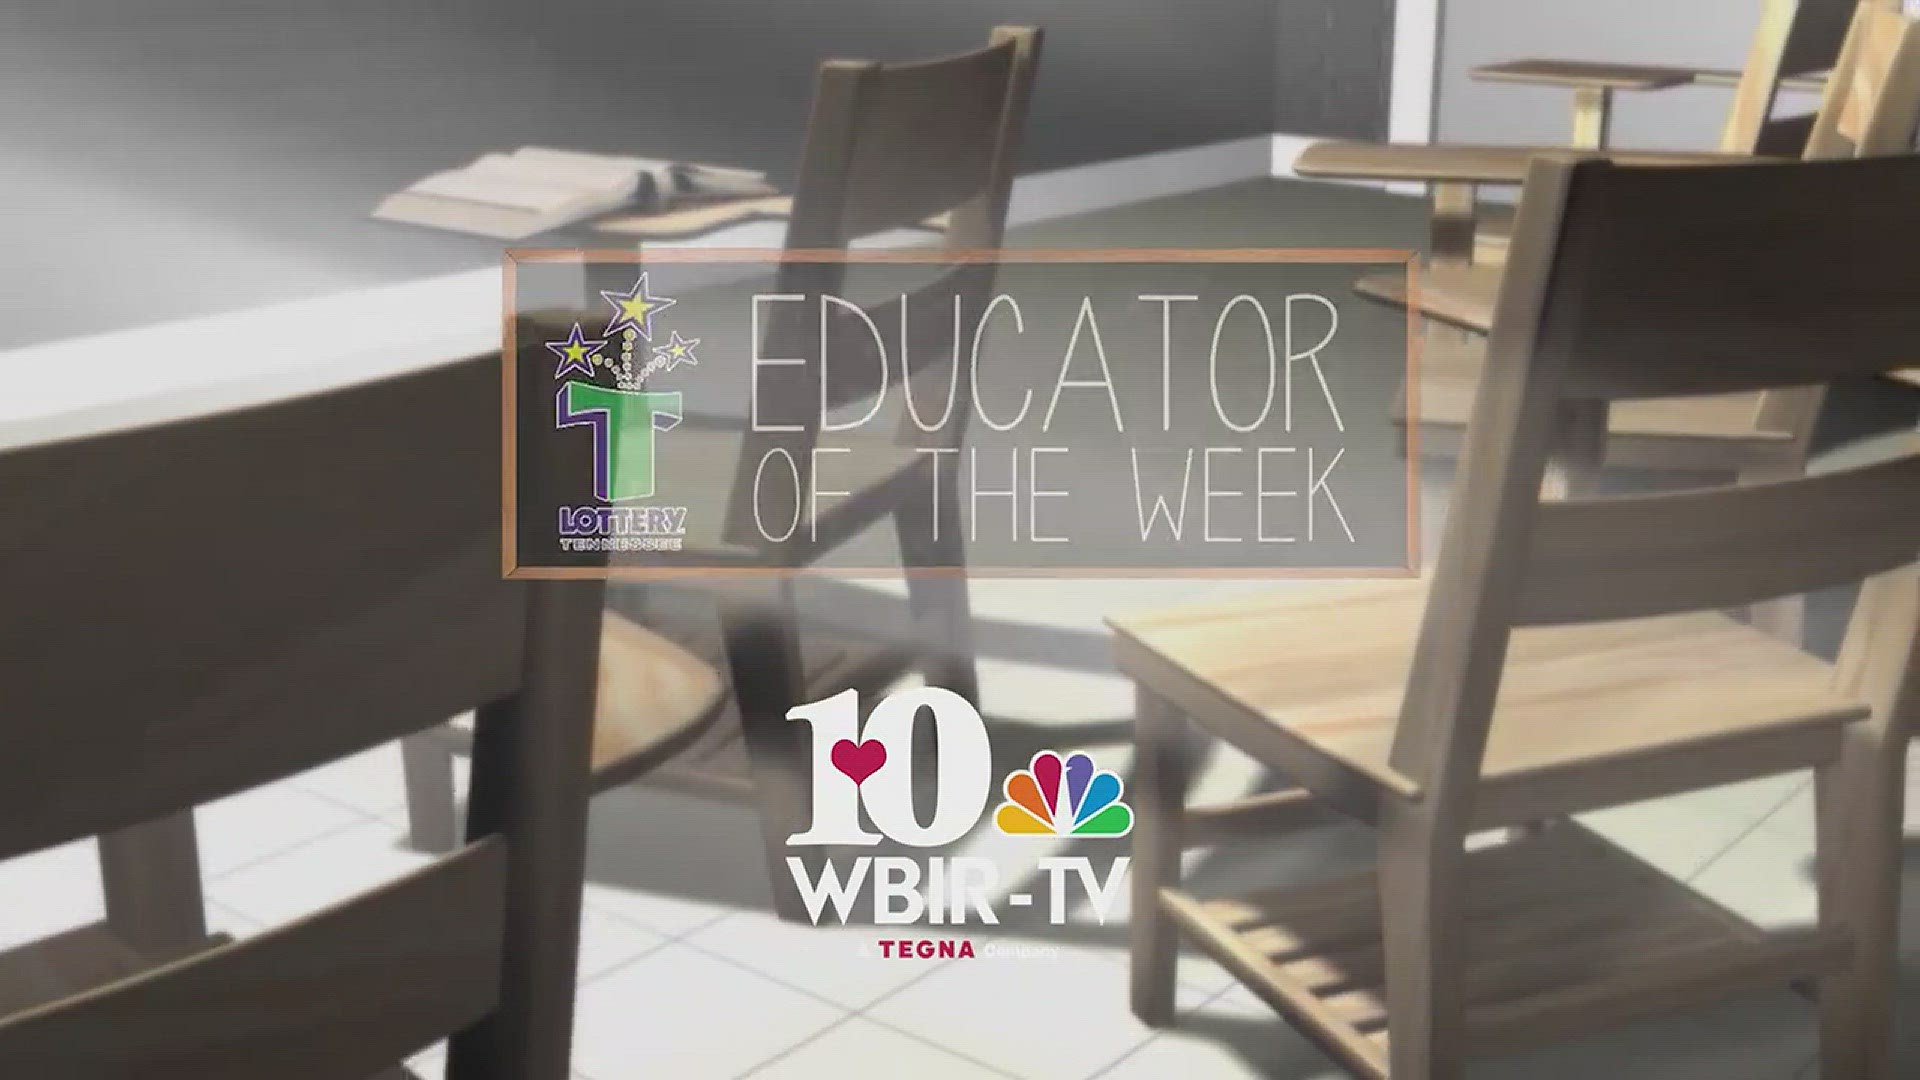 The Educator of the week for 3/19 is Telena Haneline